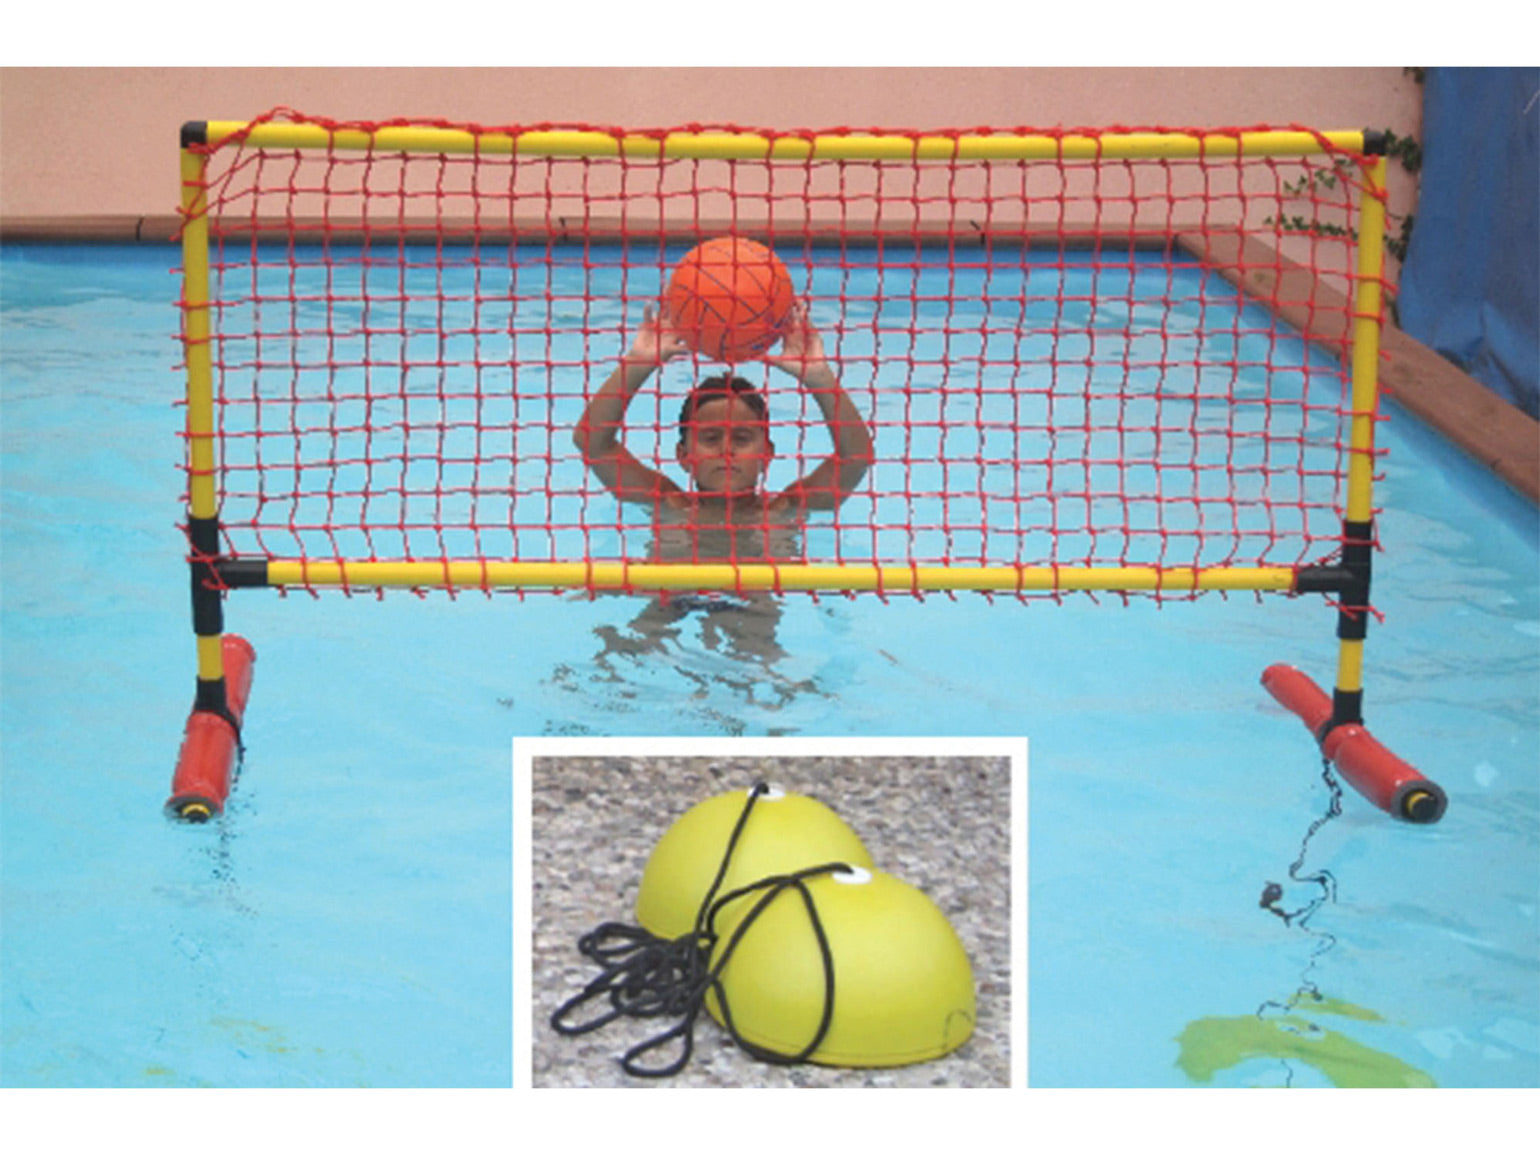 Volleyball pool system